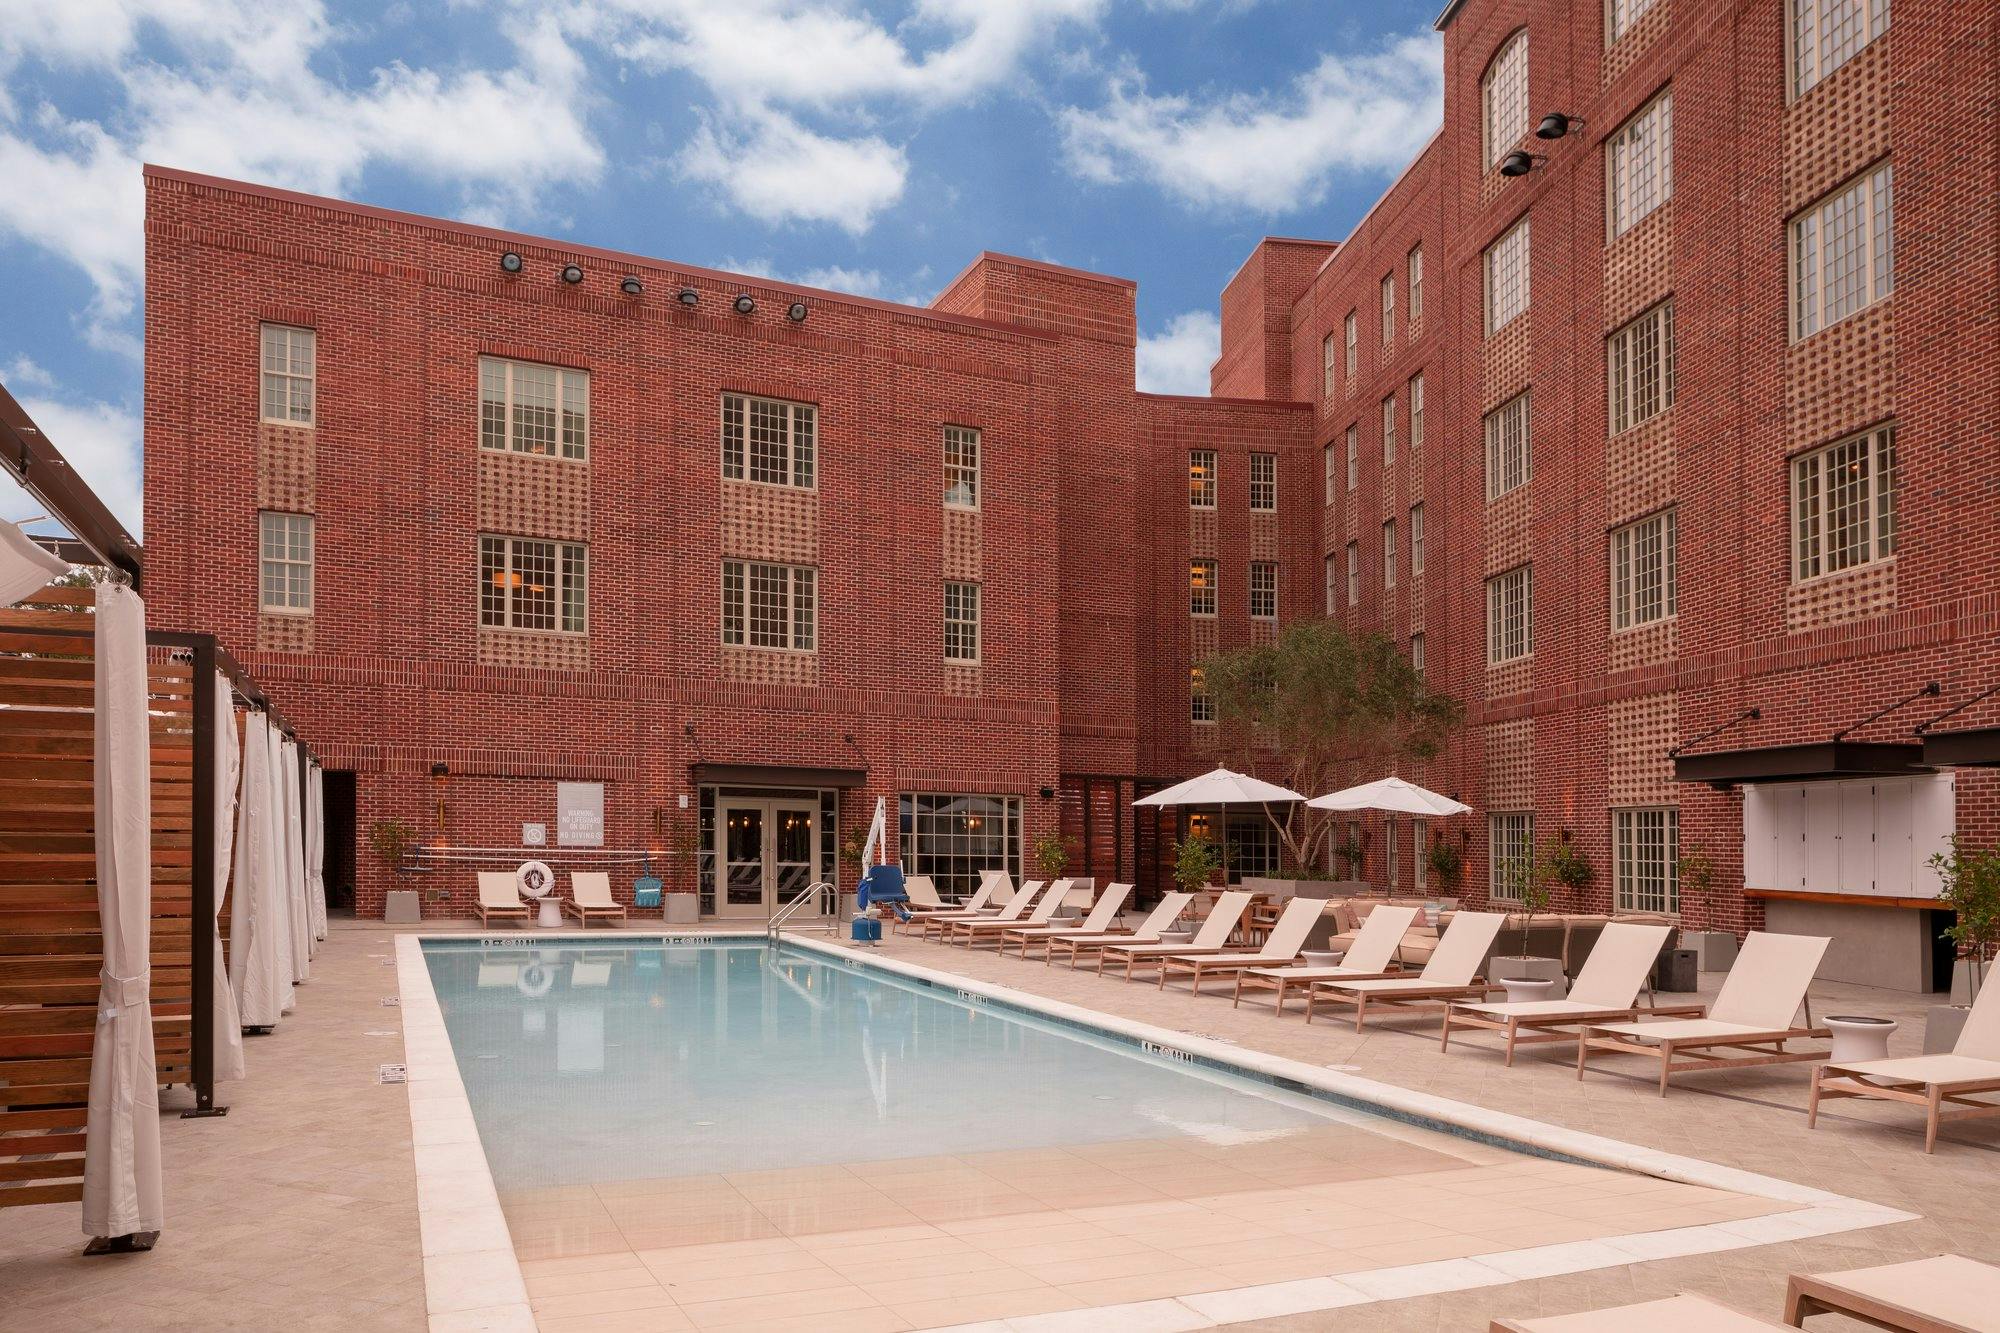 Hotel pool lined with white lounge chairs and umbrellas. Curtained cabanas and the brick exterior of the Alida Hotel surround the pool deck.